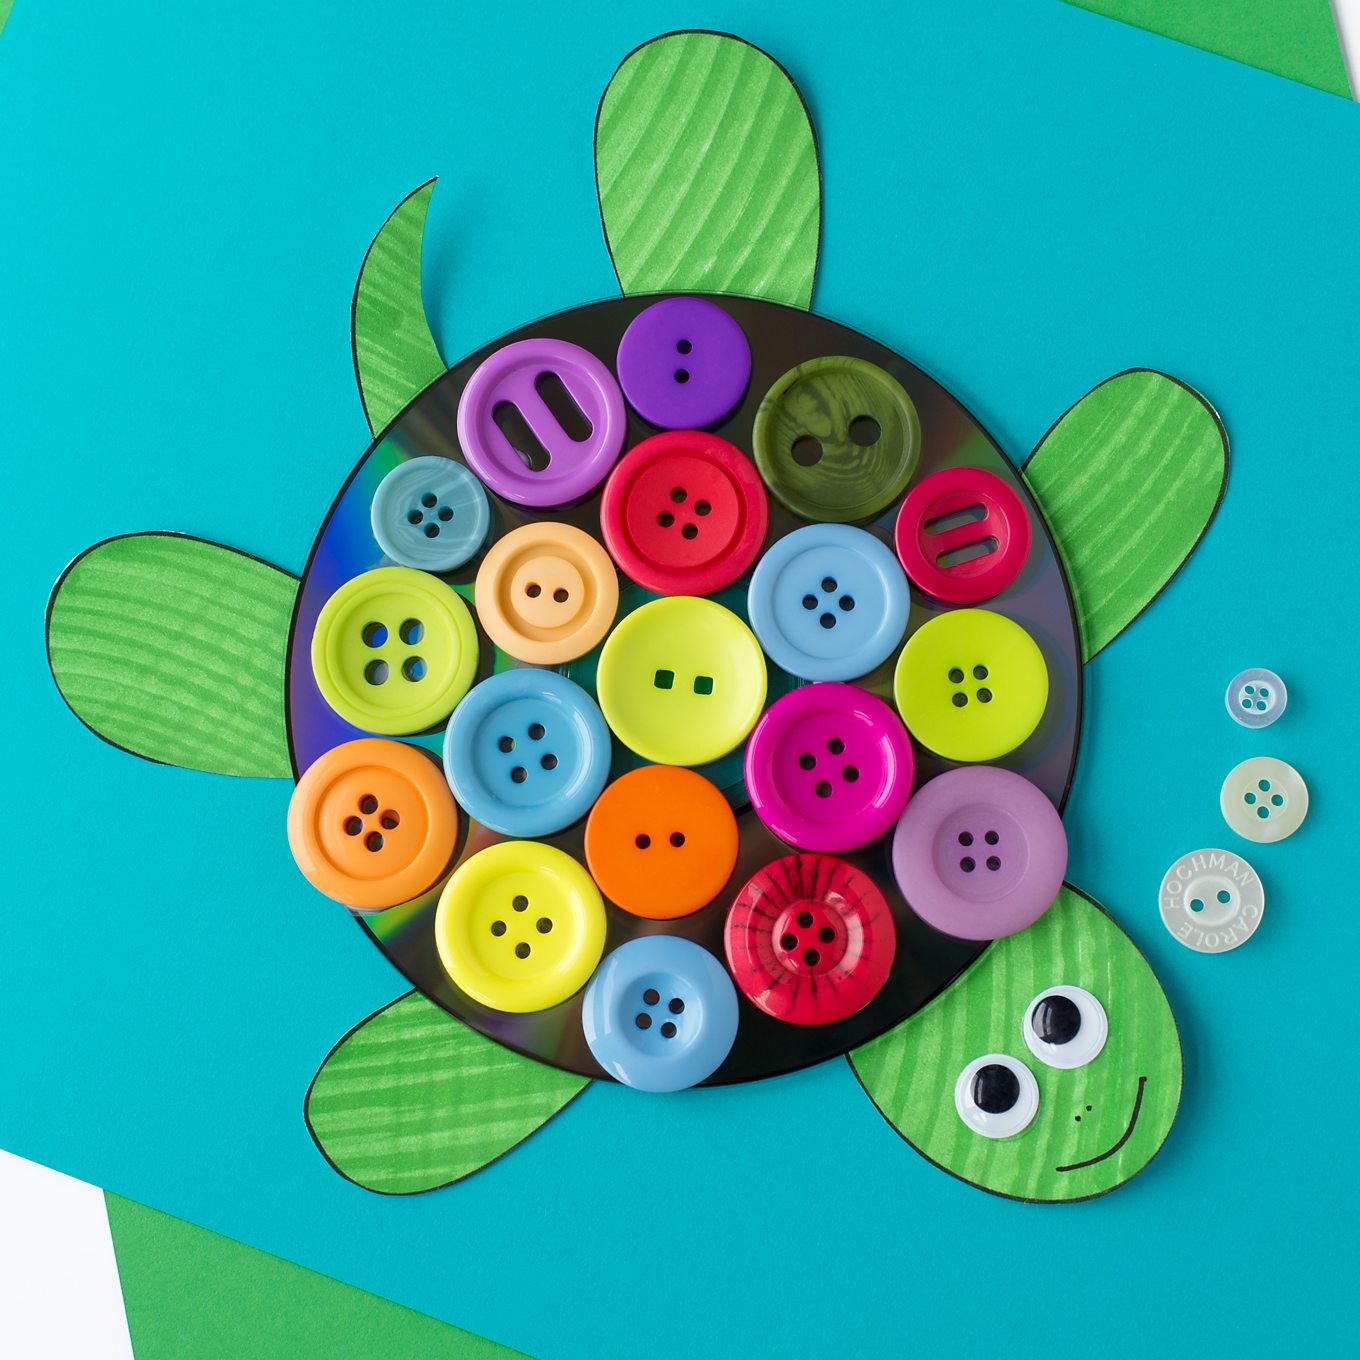 Upcycled CD and Button Turtle Craft for Kids